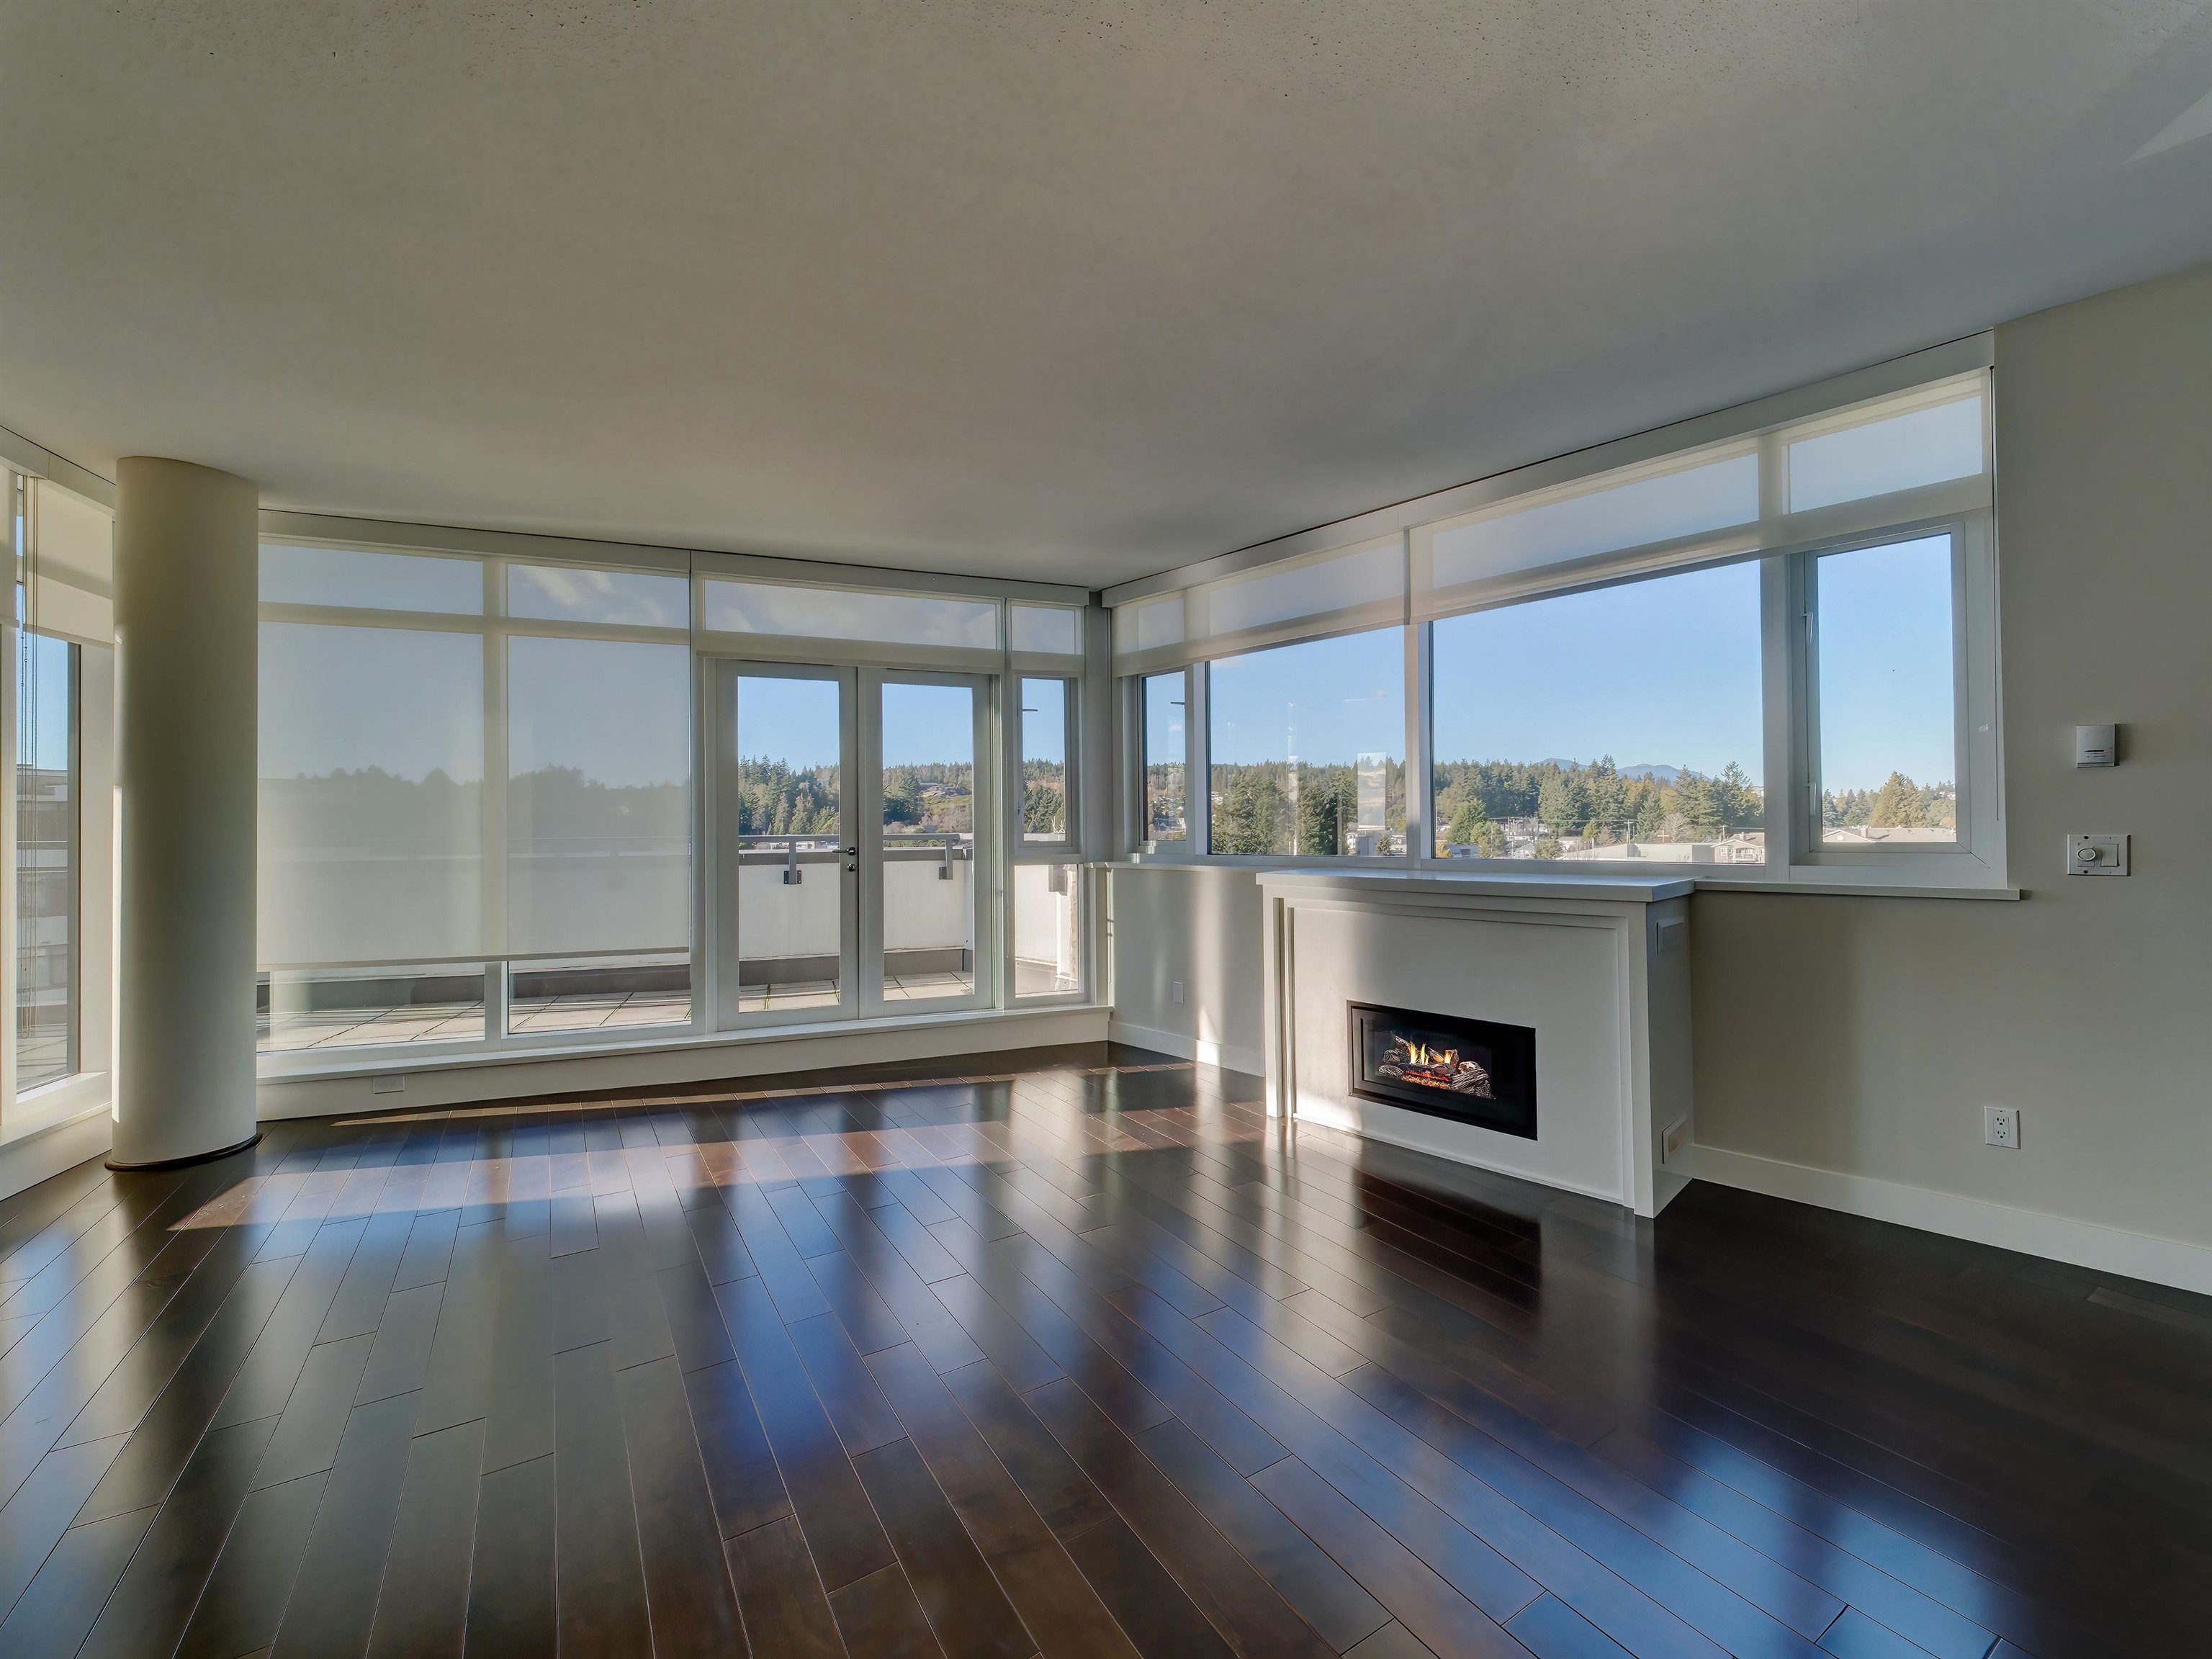 This elegant space is waiting for your decorating ideas! A slider door to the South and double French doors on the West side open up to a spacious deck and sunset view of the ocean and islands. Nicely appointed gas fireplace adds warmth to the open plan.